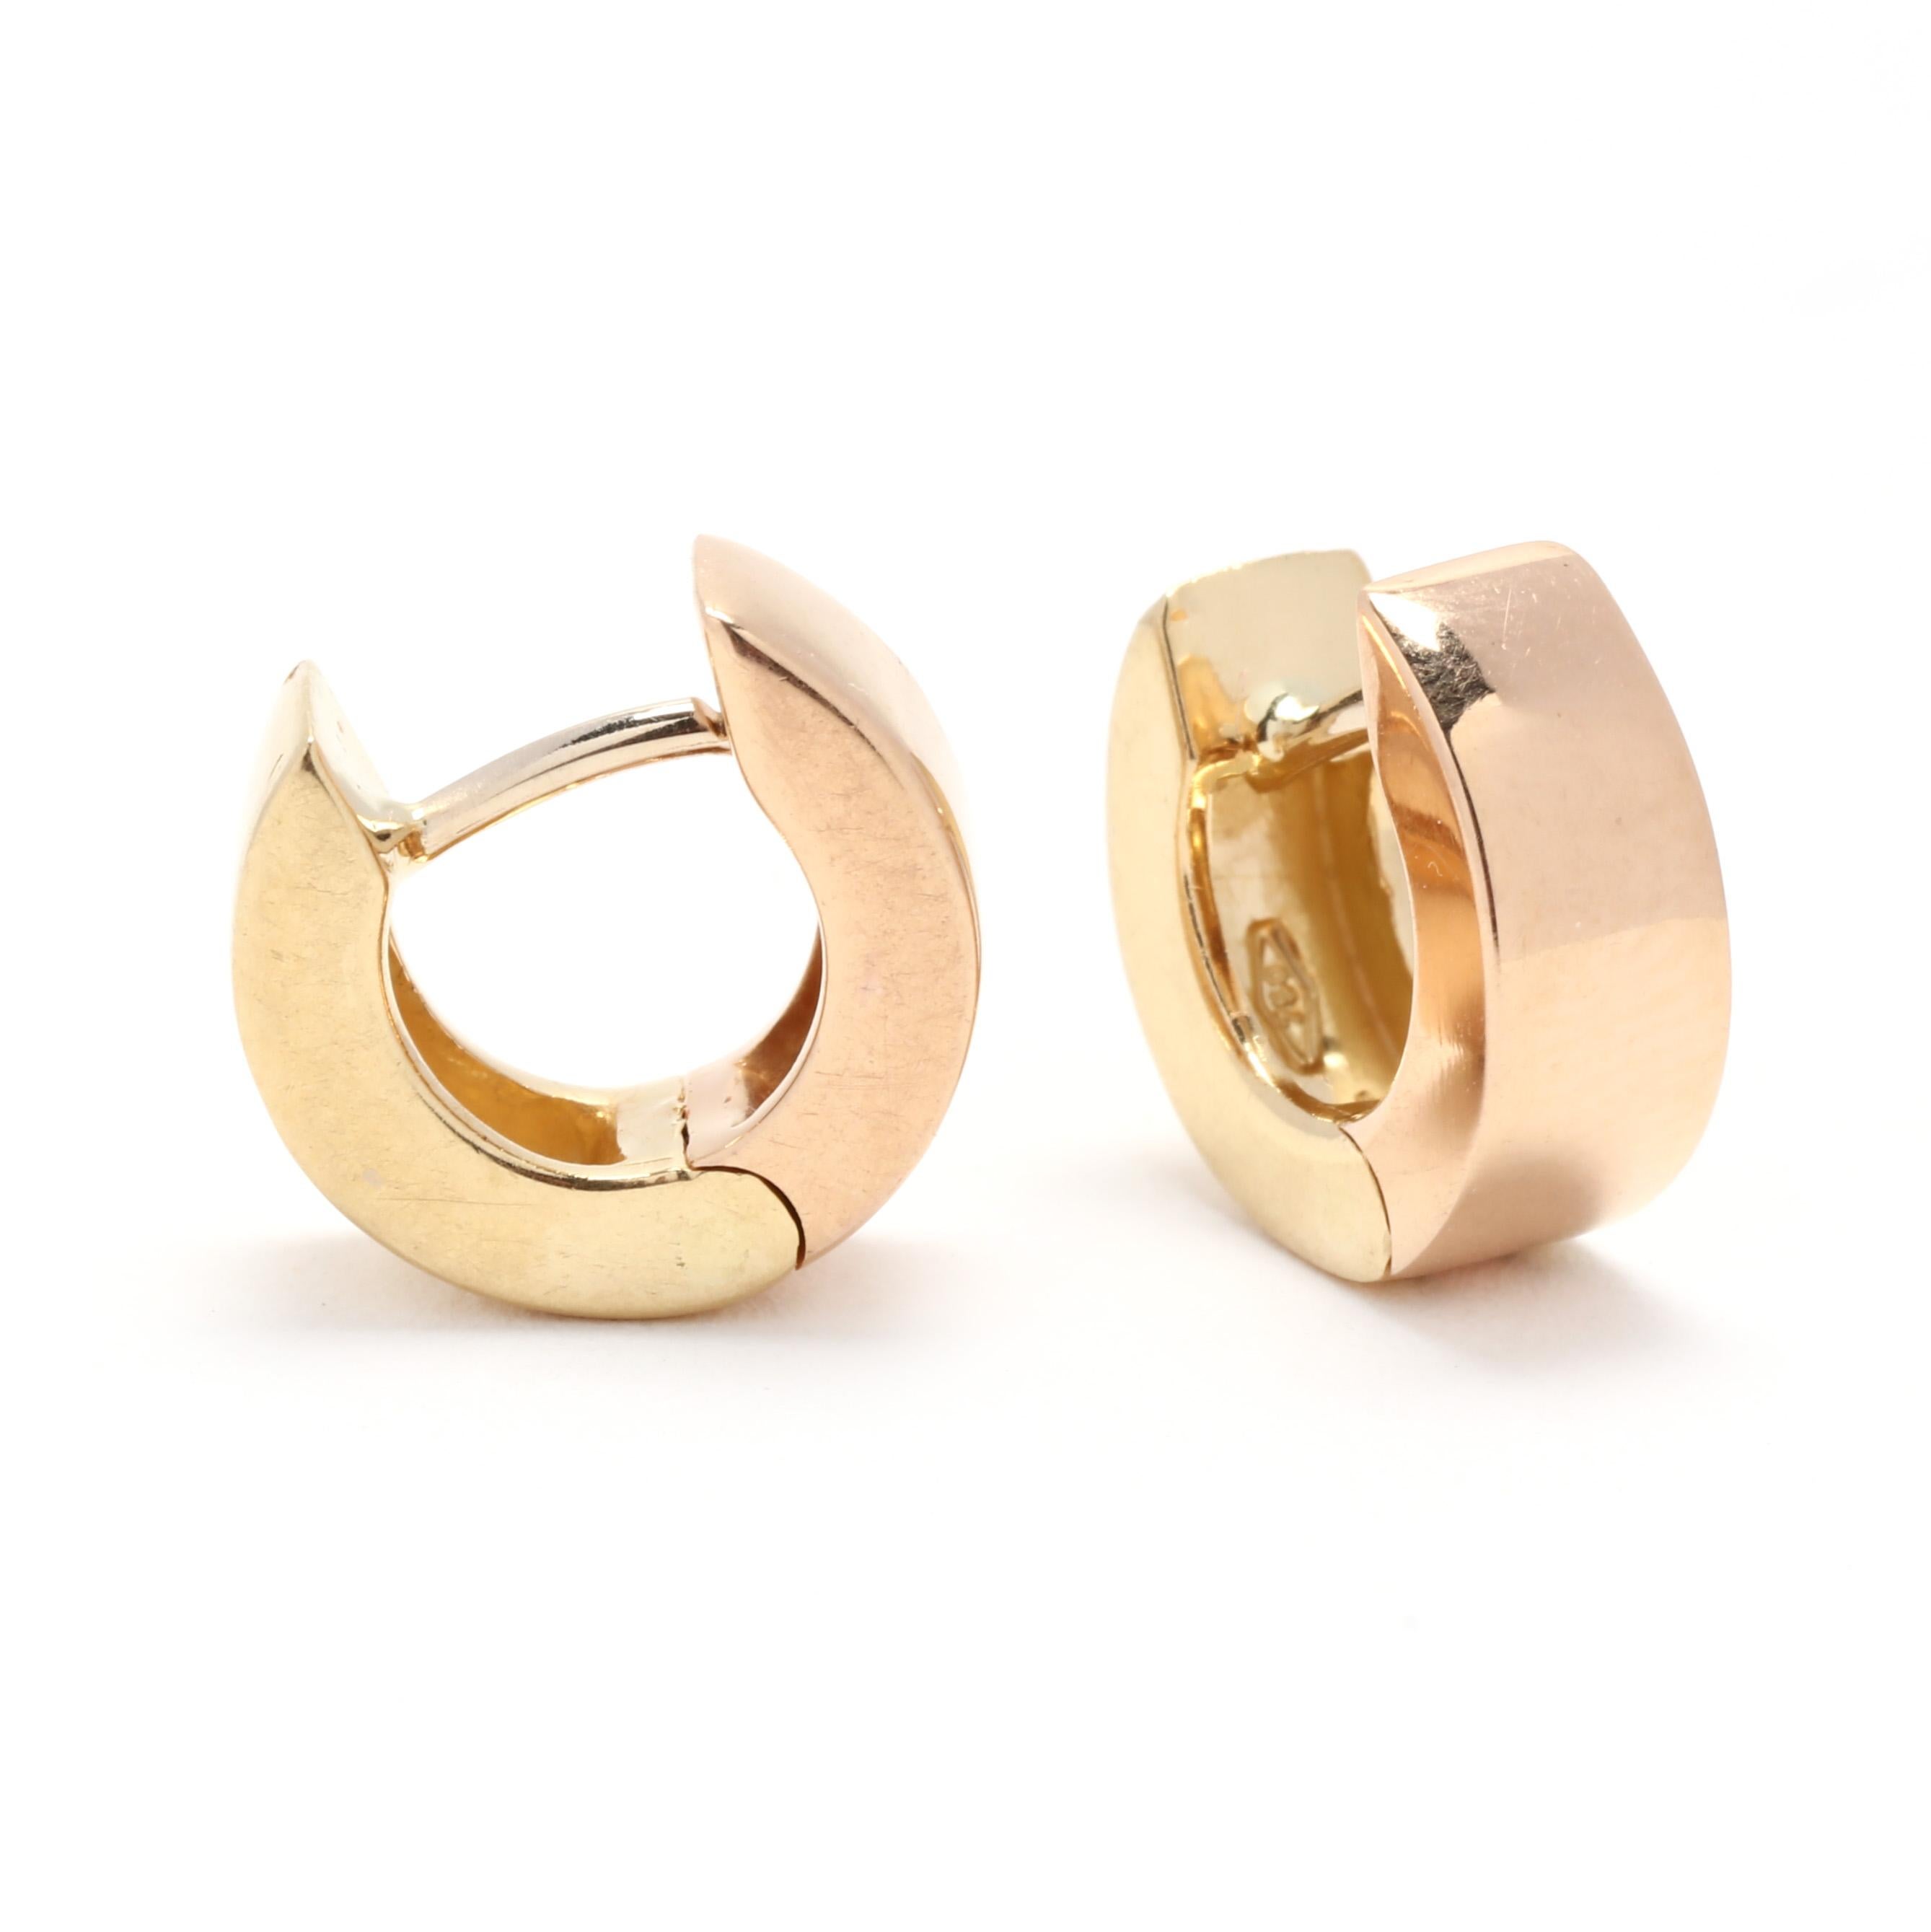 A pair of vintage 18 karat bi color gold wide huggie hoop earrings. These solid gold huggie hoops feature a squared off motif with one side in yellow gold, the other in rose gold and with pierced snap closures.

Inner Diameter: 7 mm

Width: 4.85